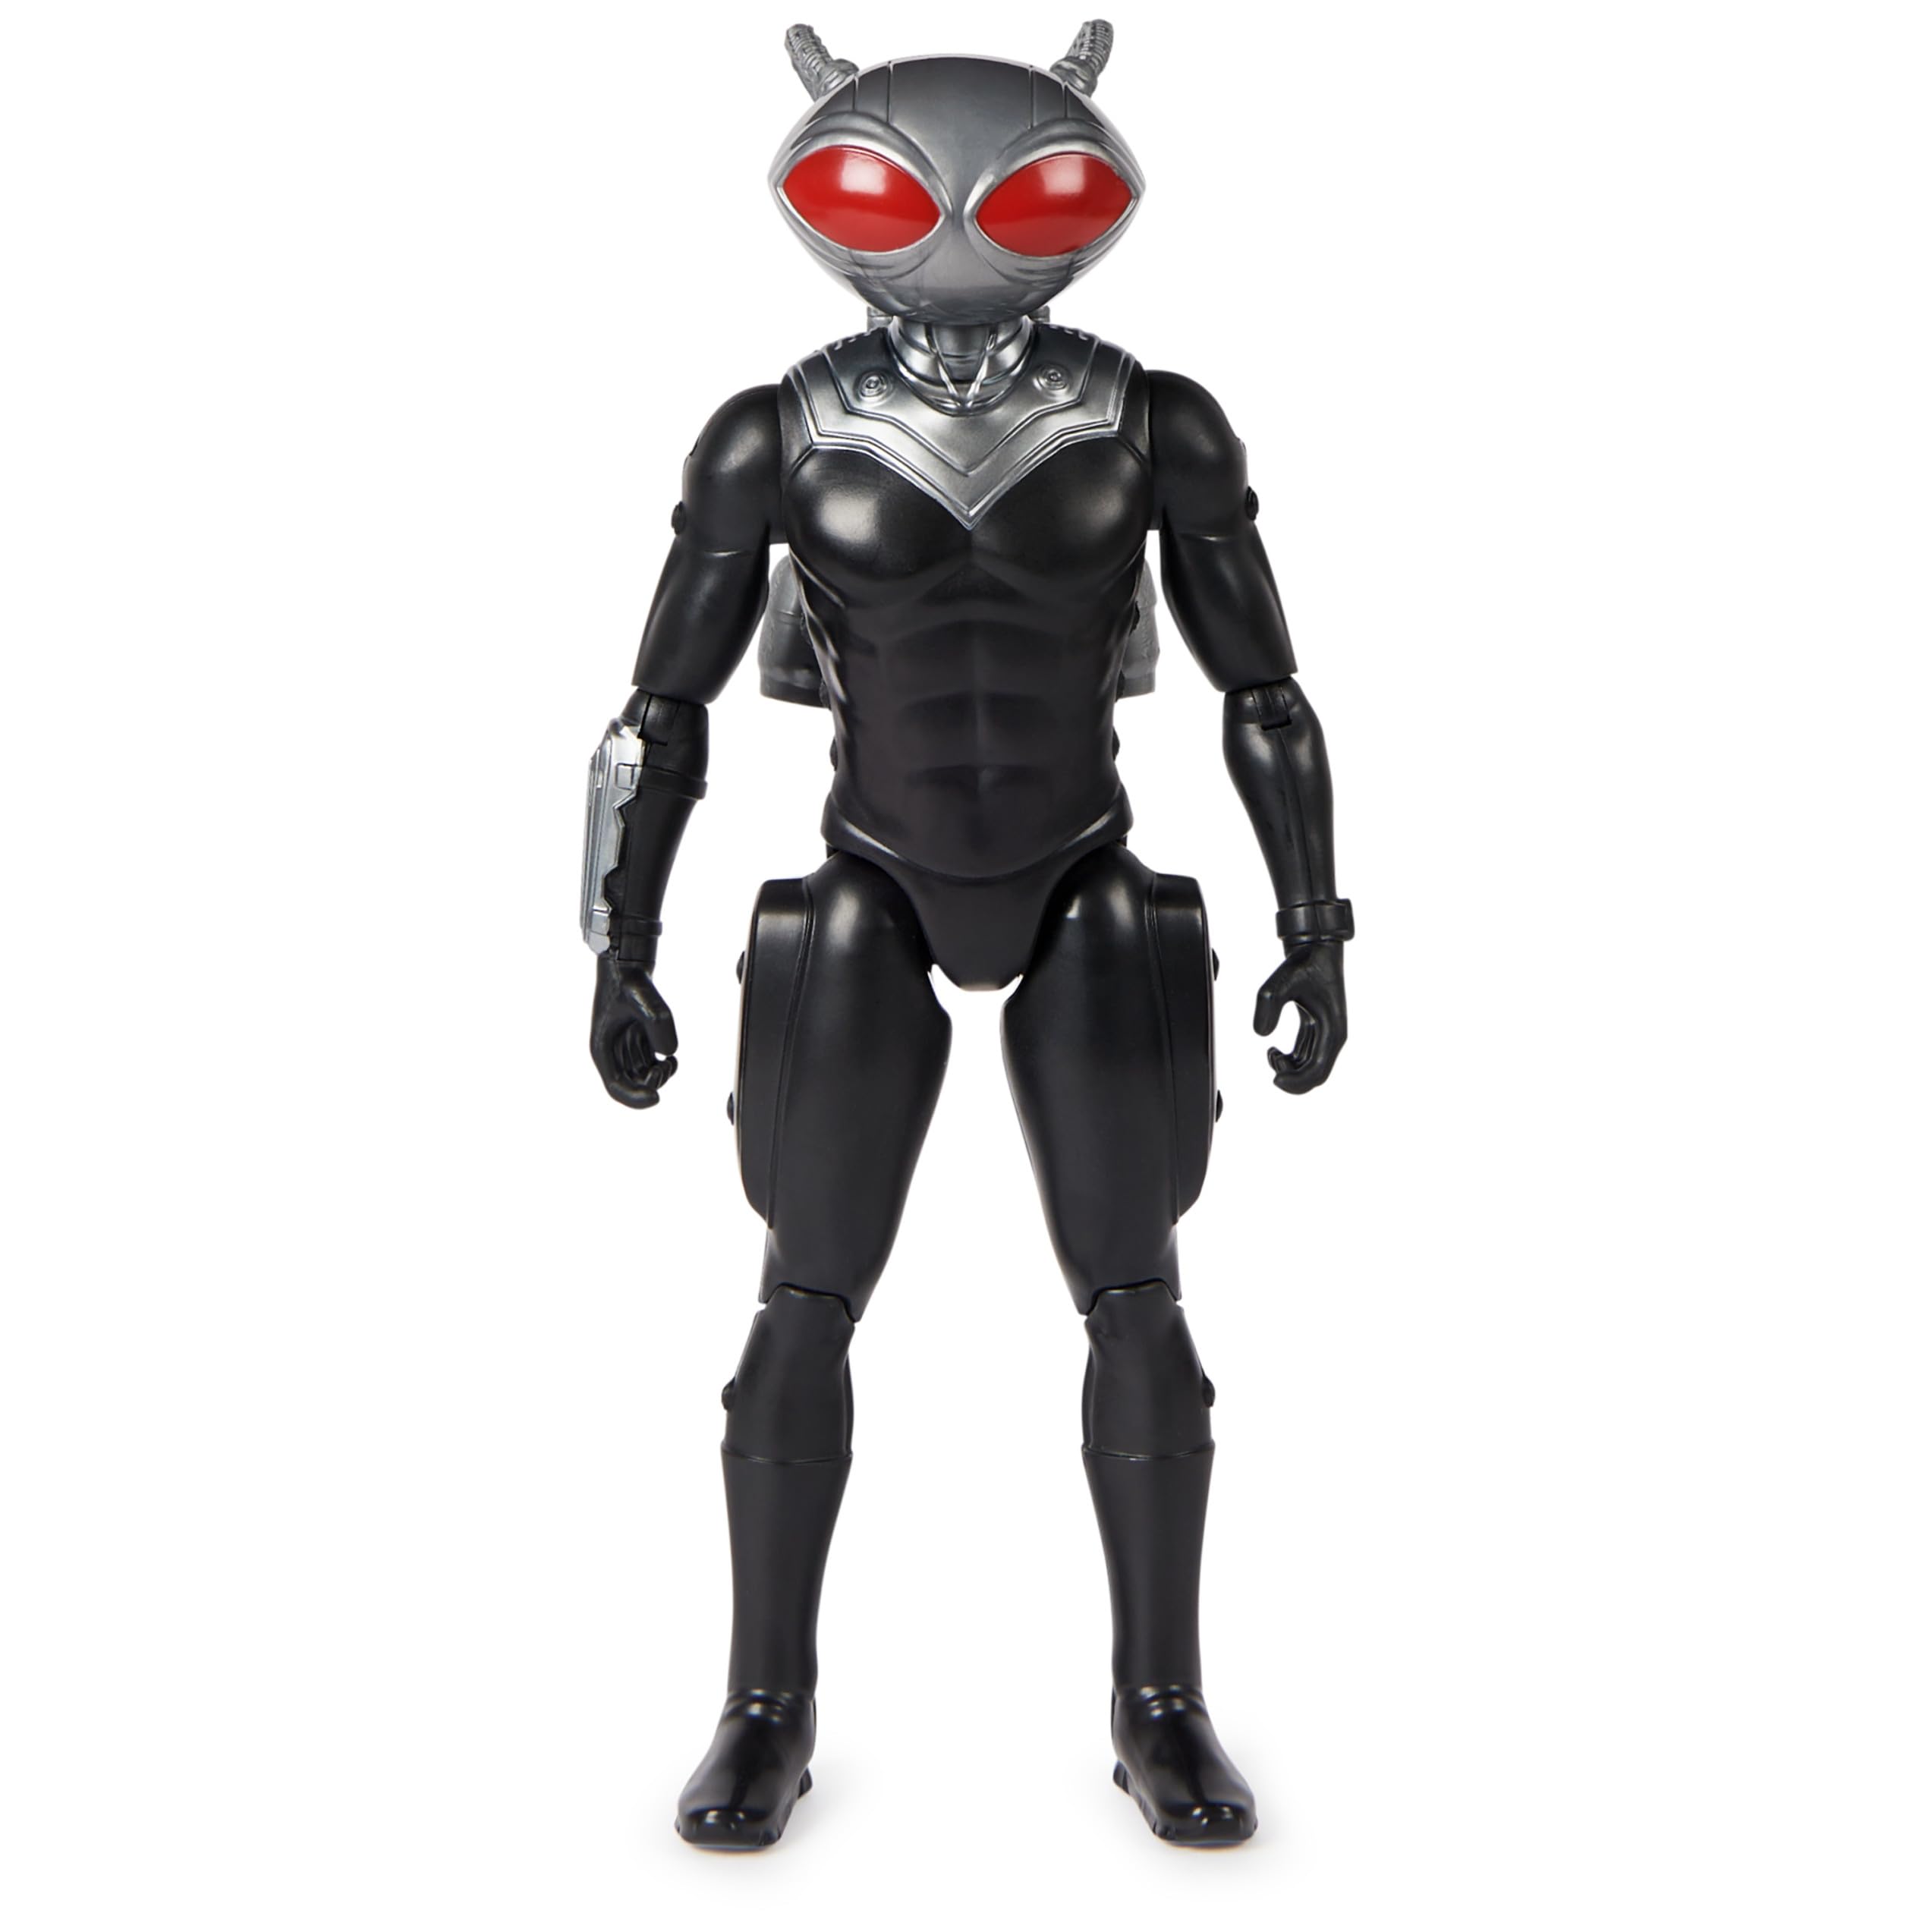 DC Comics, Aquaman, Black Manta Action Figure, 12-inch, Detailed Sculpting, Movie Styling, Easy to Pose, Collectible Superhero Kids Toys for Boys 3+